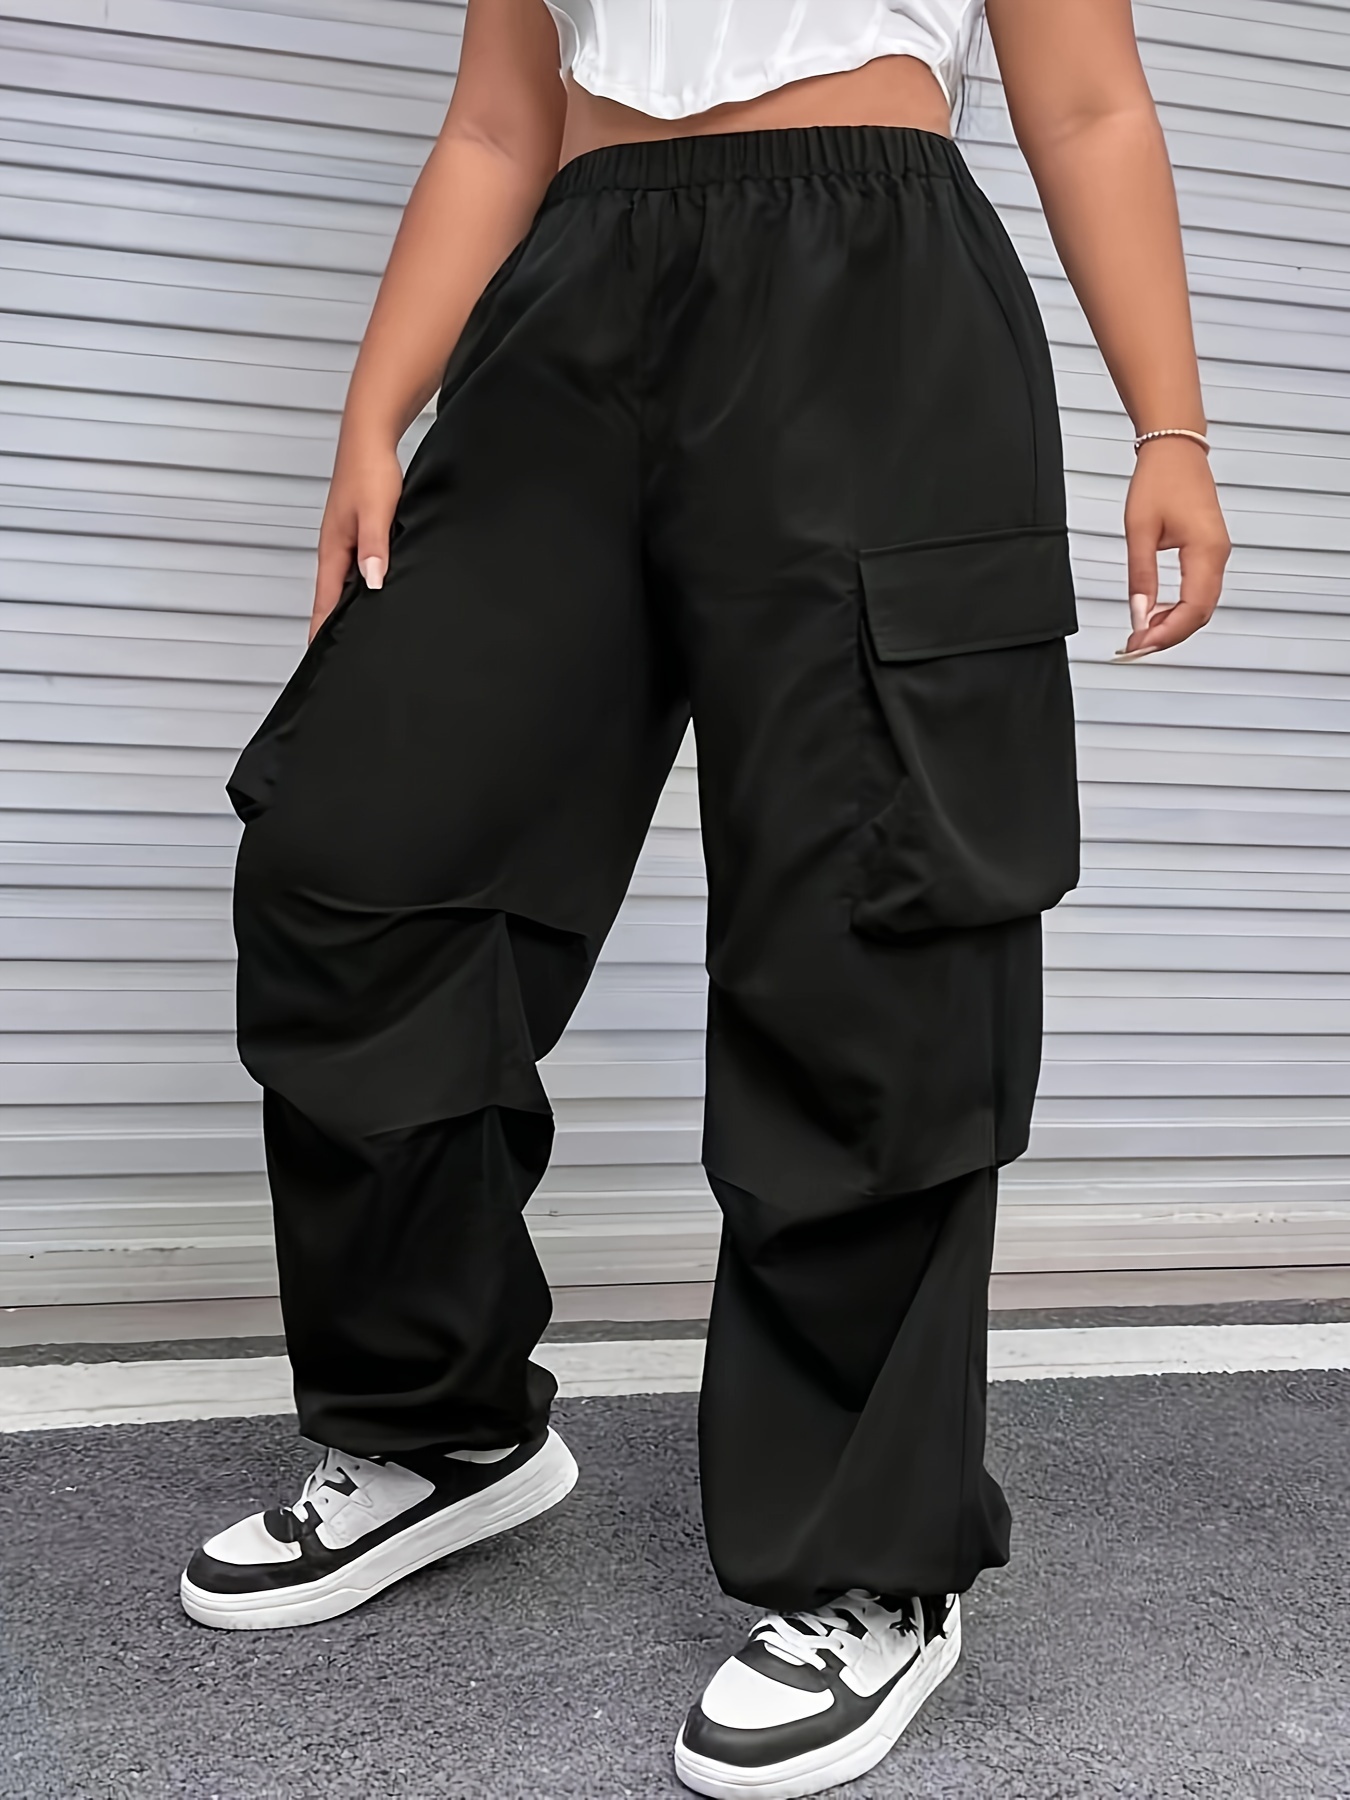 HSMQHJWE Womans Clothes 20 Plus Size Dress Pants Womens Black Work Pants  Solid Stretch High Waist Zipper High Waist Straight Pants With Pocket Trousers  Plus Size Pants Cute 